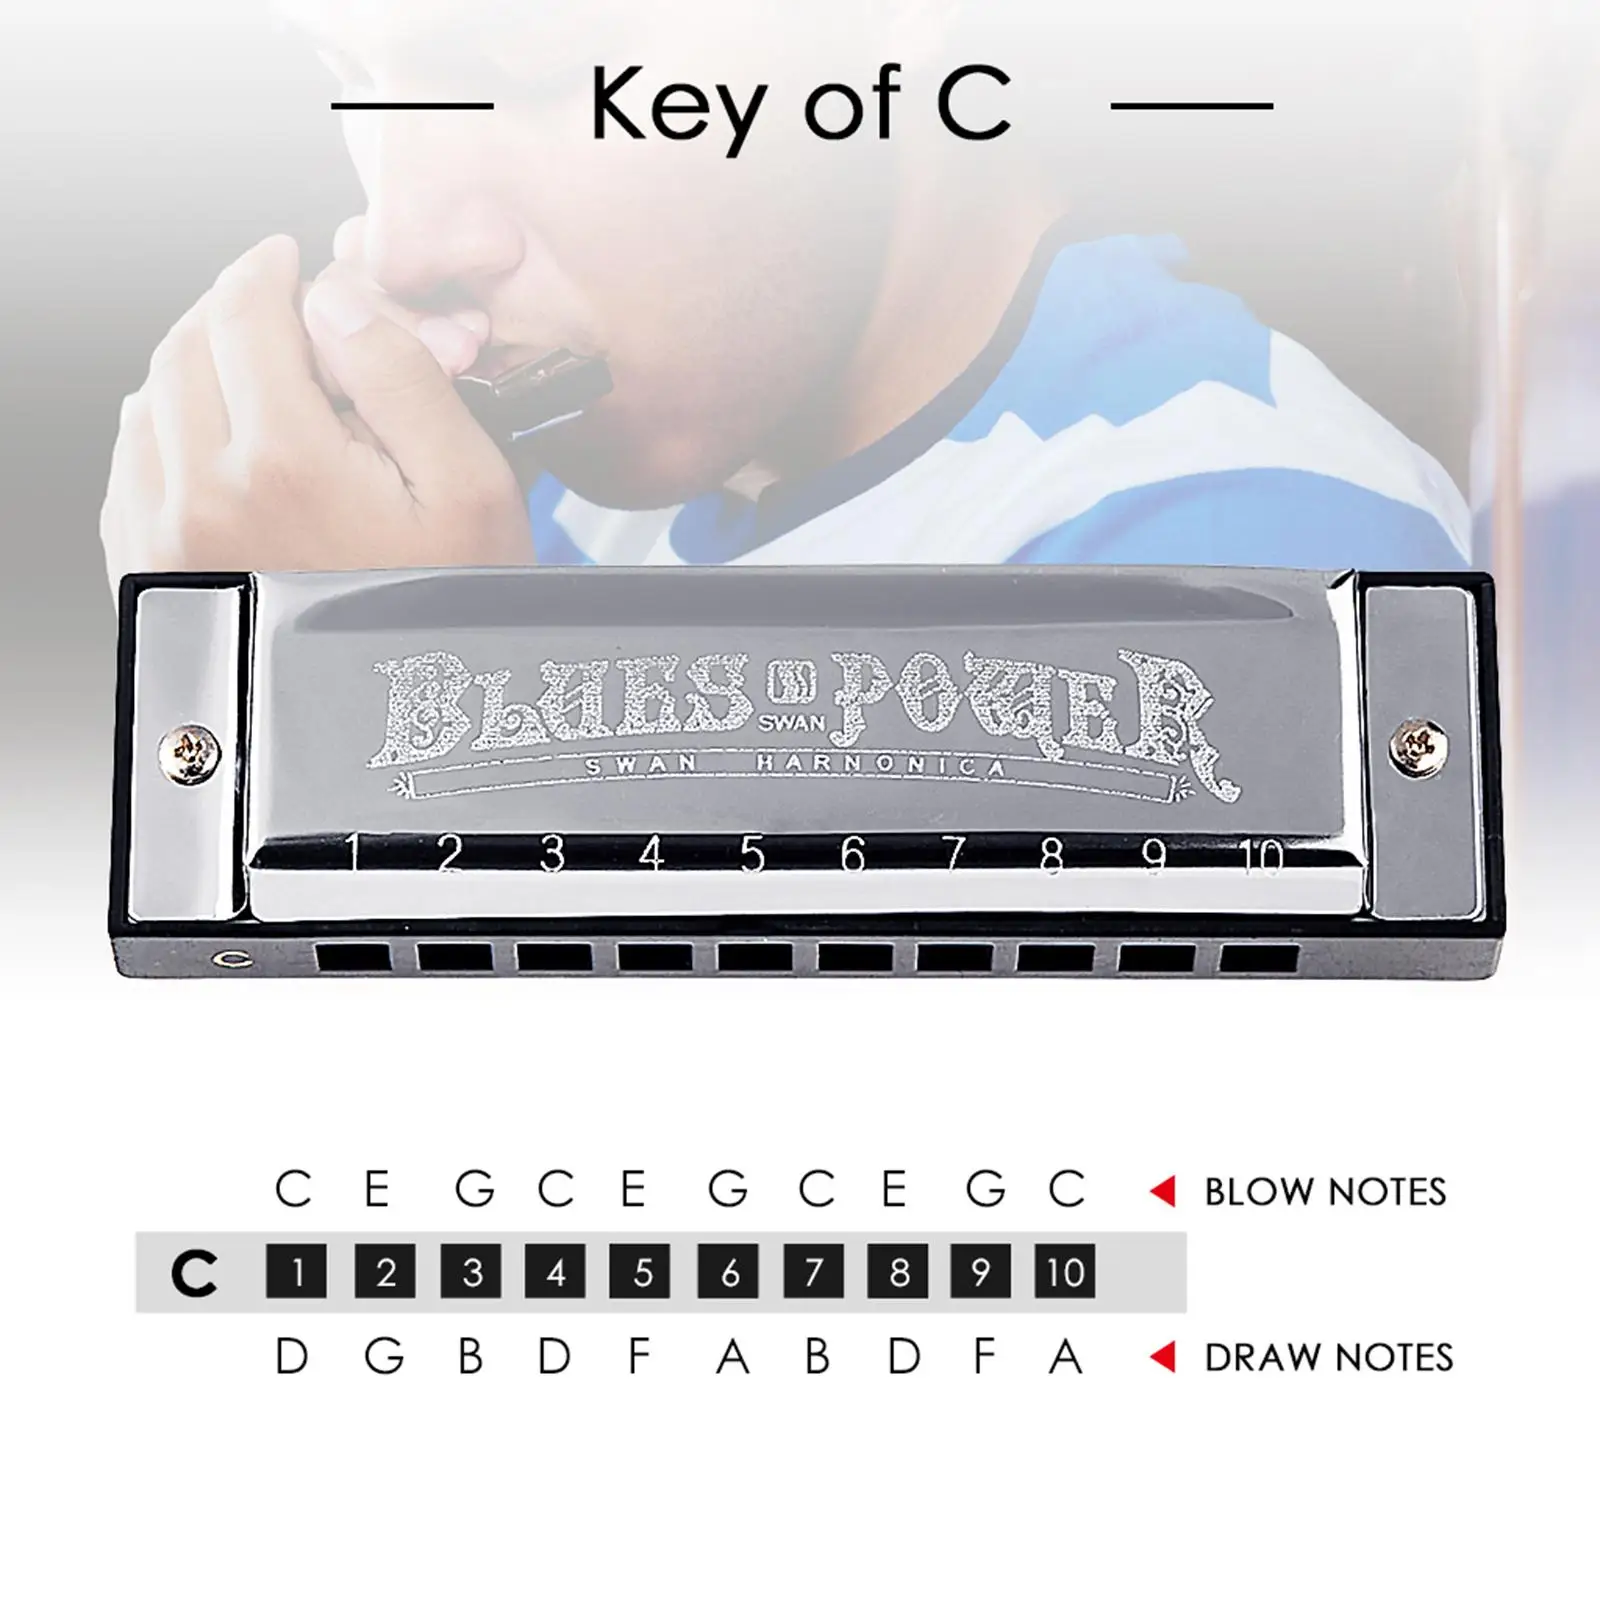 Portable Harmonica 10 Holes C Key 3 Octaves Mouth Organ for Music Lovers Beginners Adults Professionals Holiday Gift